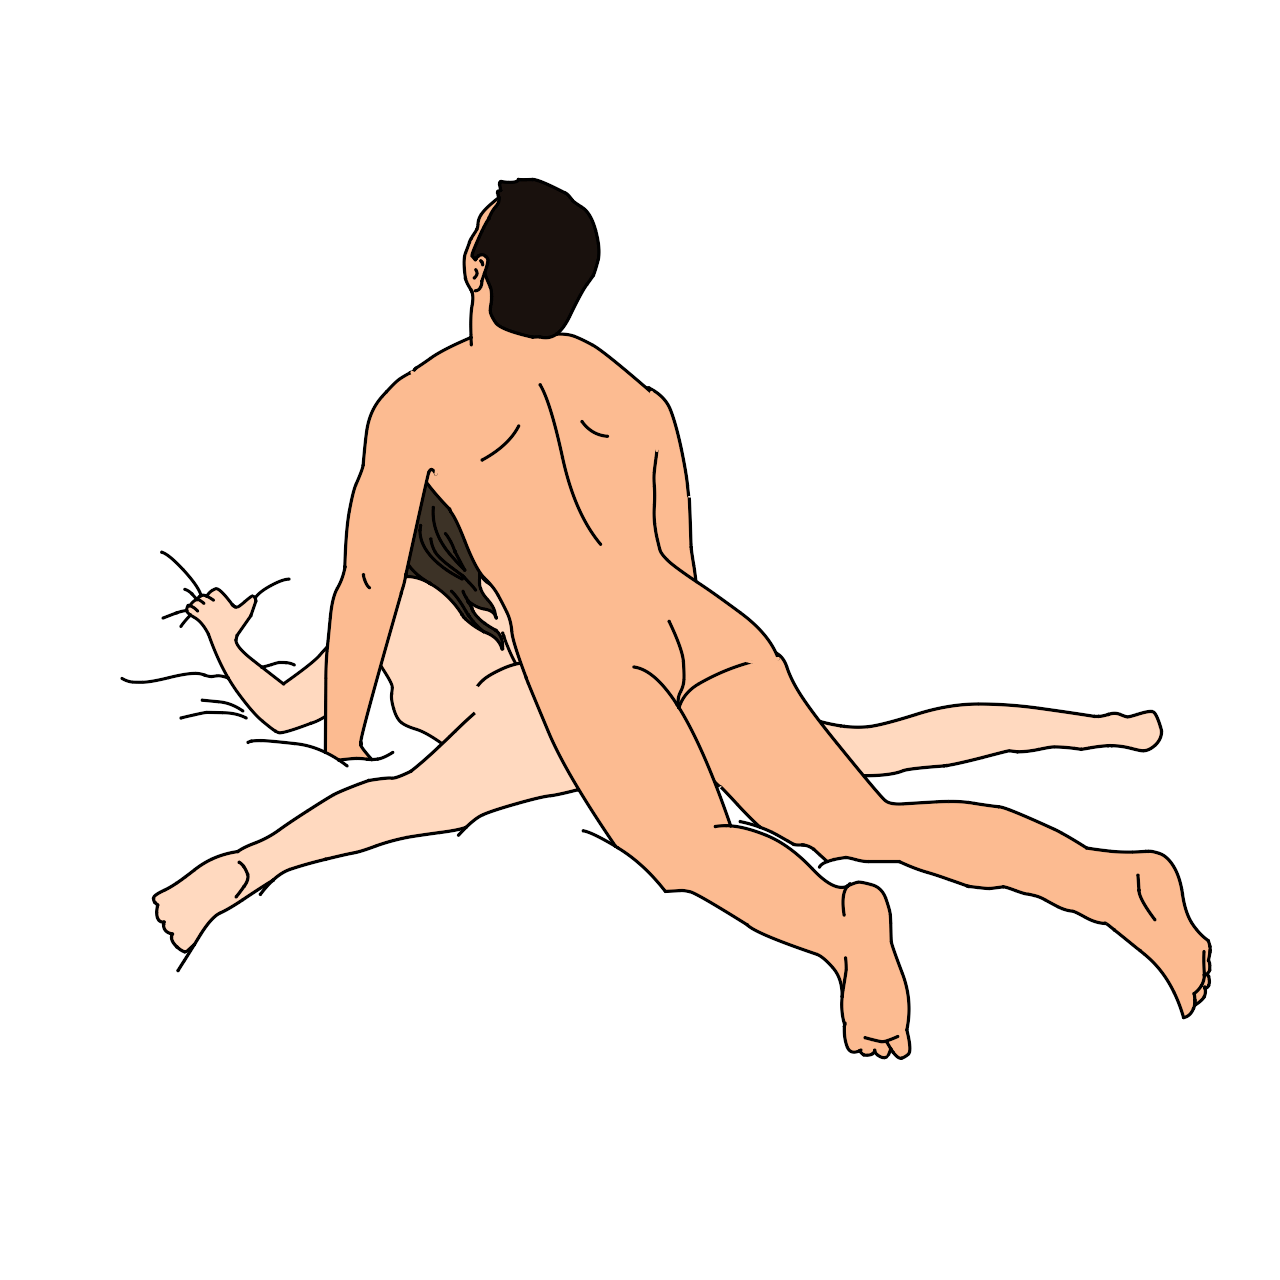 Sexual animations